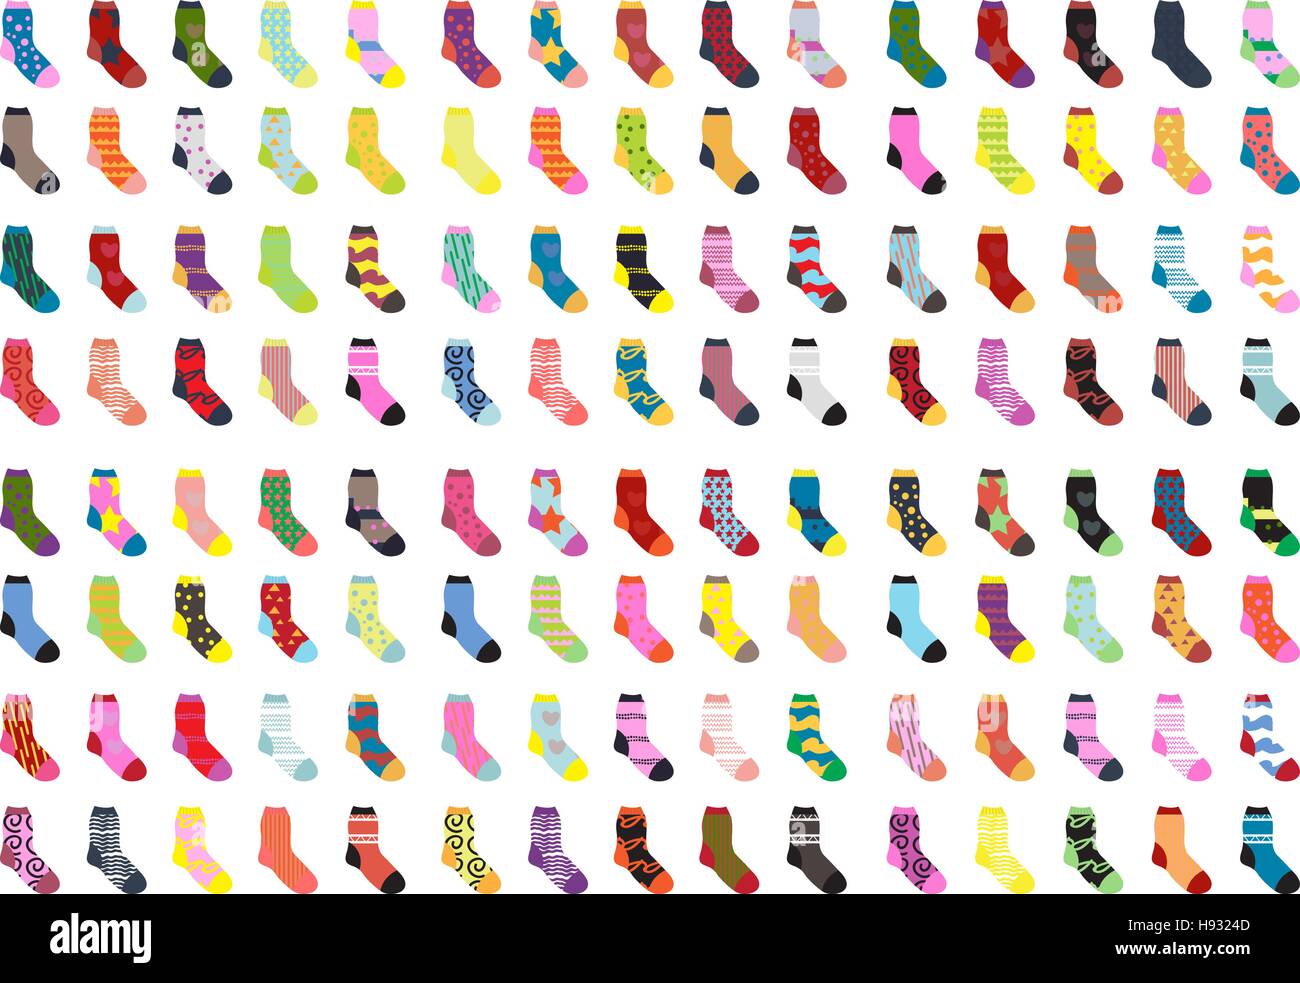 Socks big set icons. Socks collection, flat design. Socks isolated on white background. Warm woolen socks with cute patterns. Winter socks. Vector illustration Stock Vector